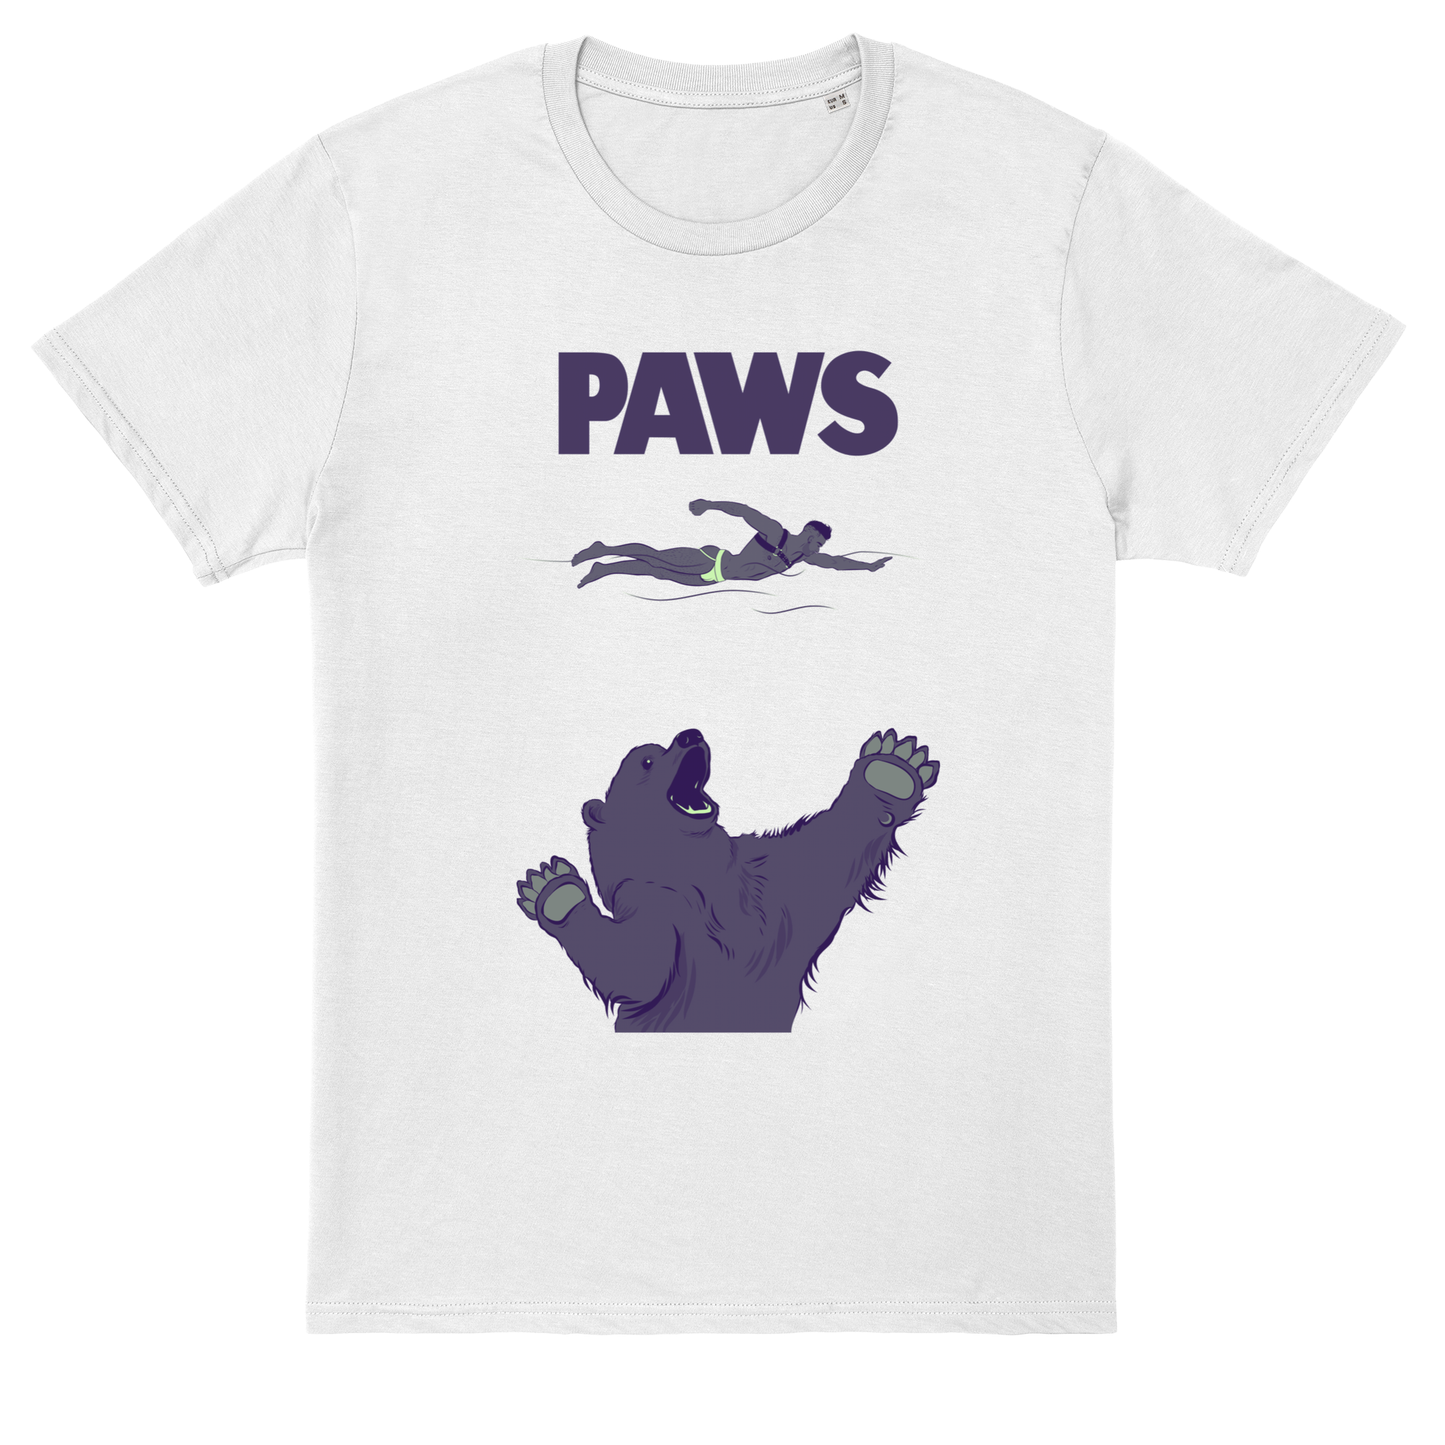 Paws T-shirt now available for preorder